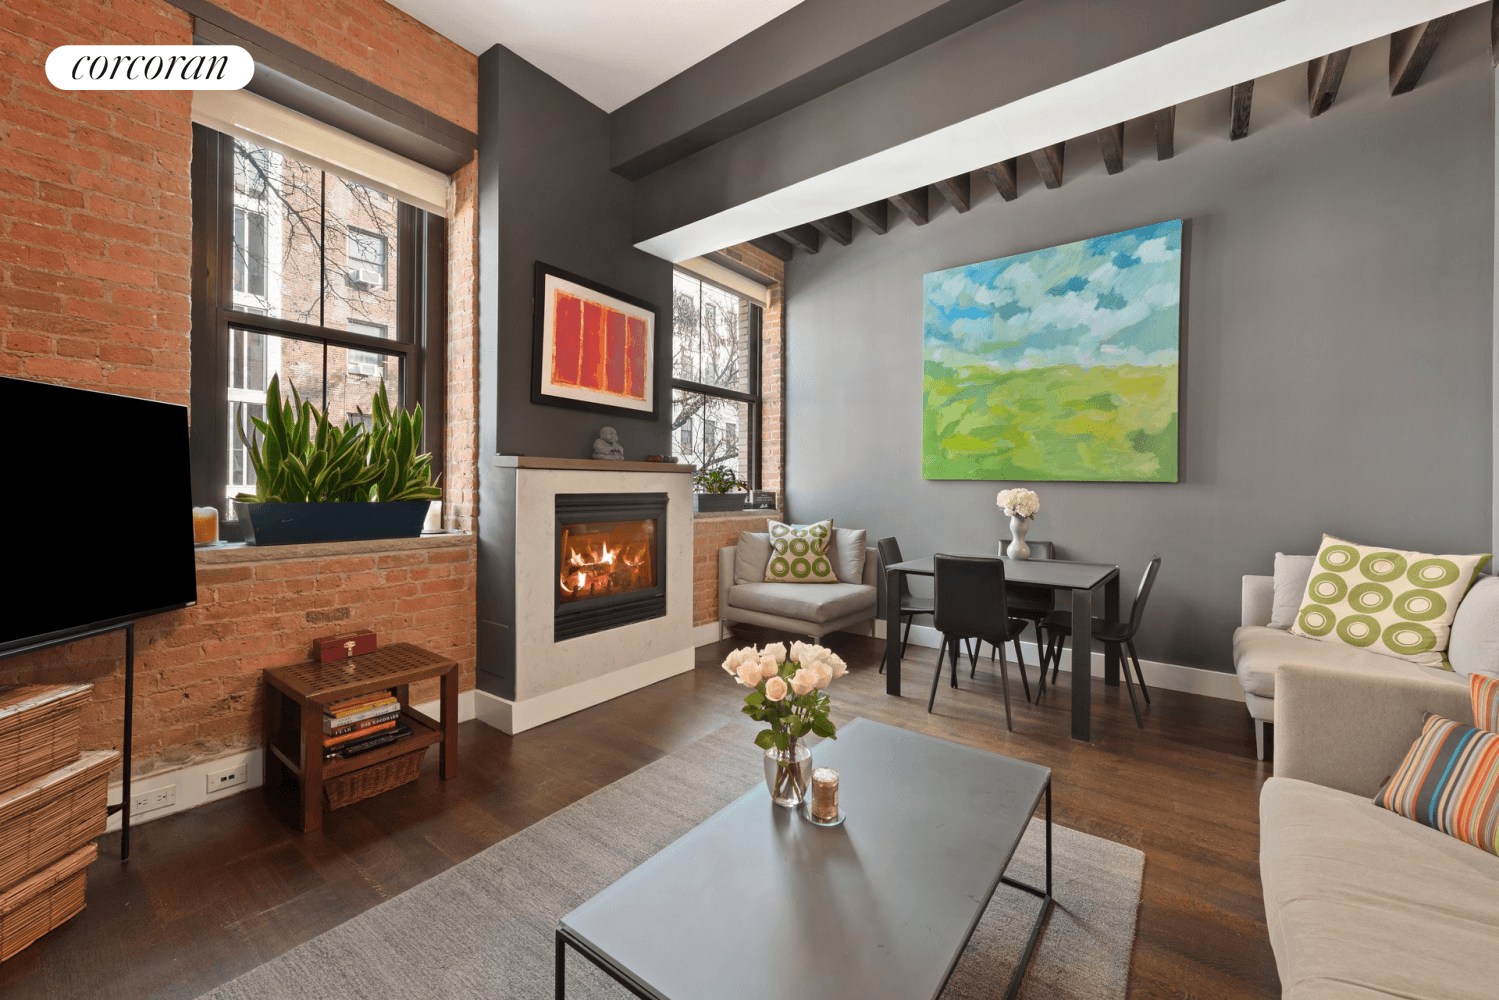 Pre War Charm Modern Luxury The Perfect Hell's Kitchen CondoWelcome home to the perfect Hell's Kitchen one bedroom condominium you've been waiting for.